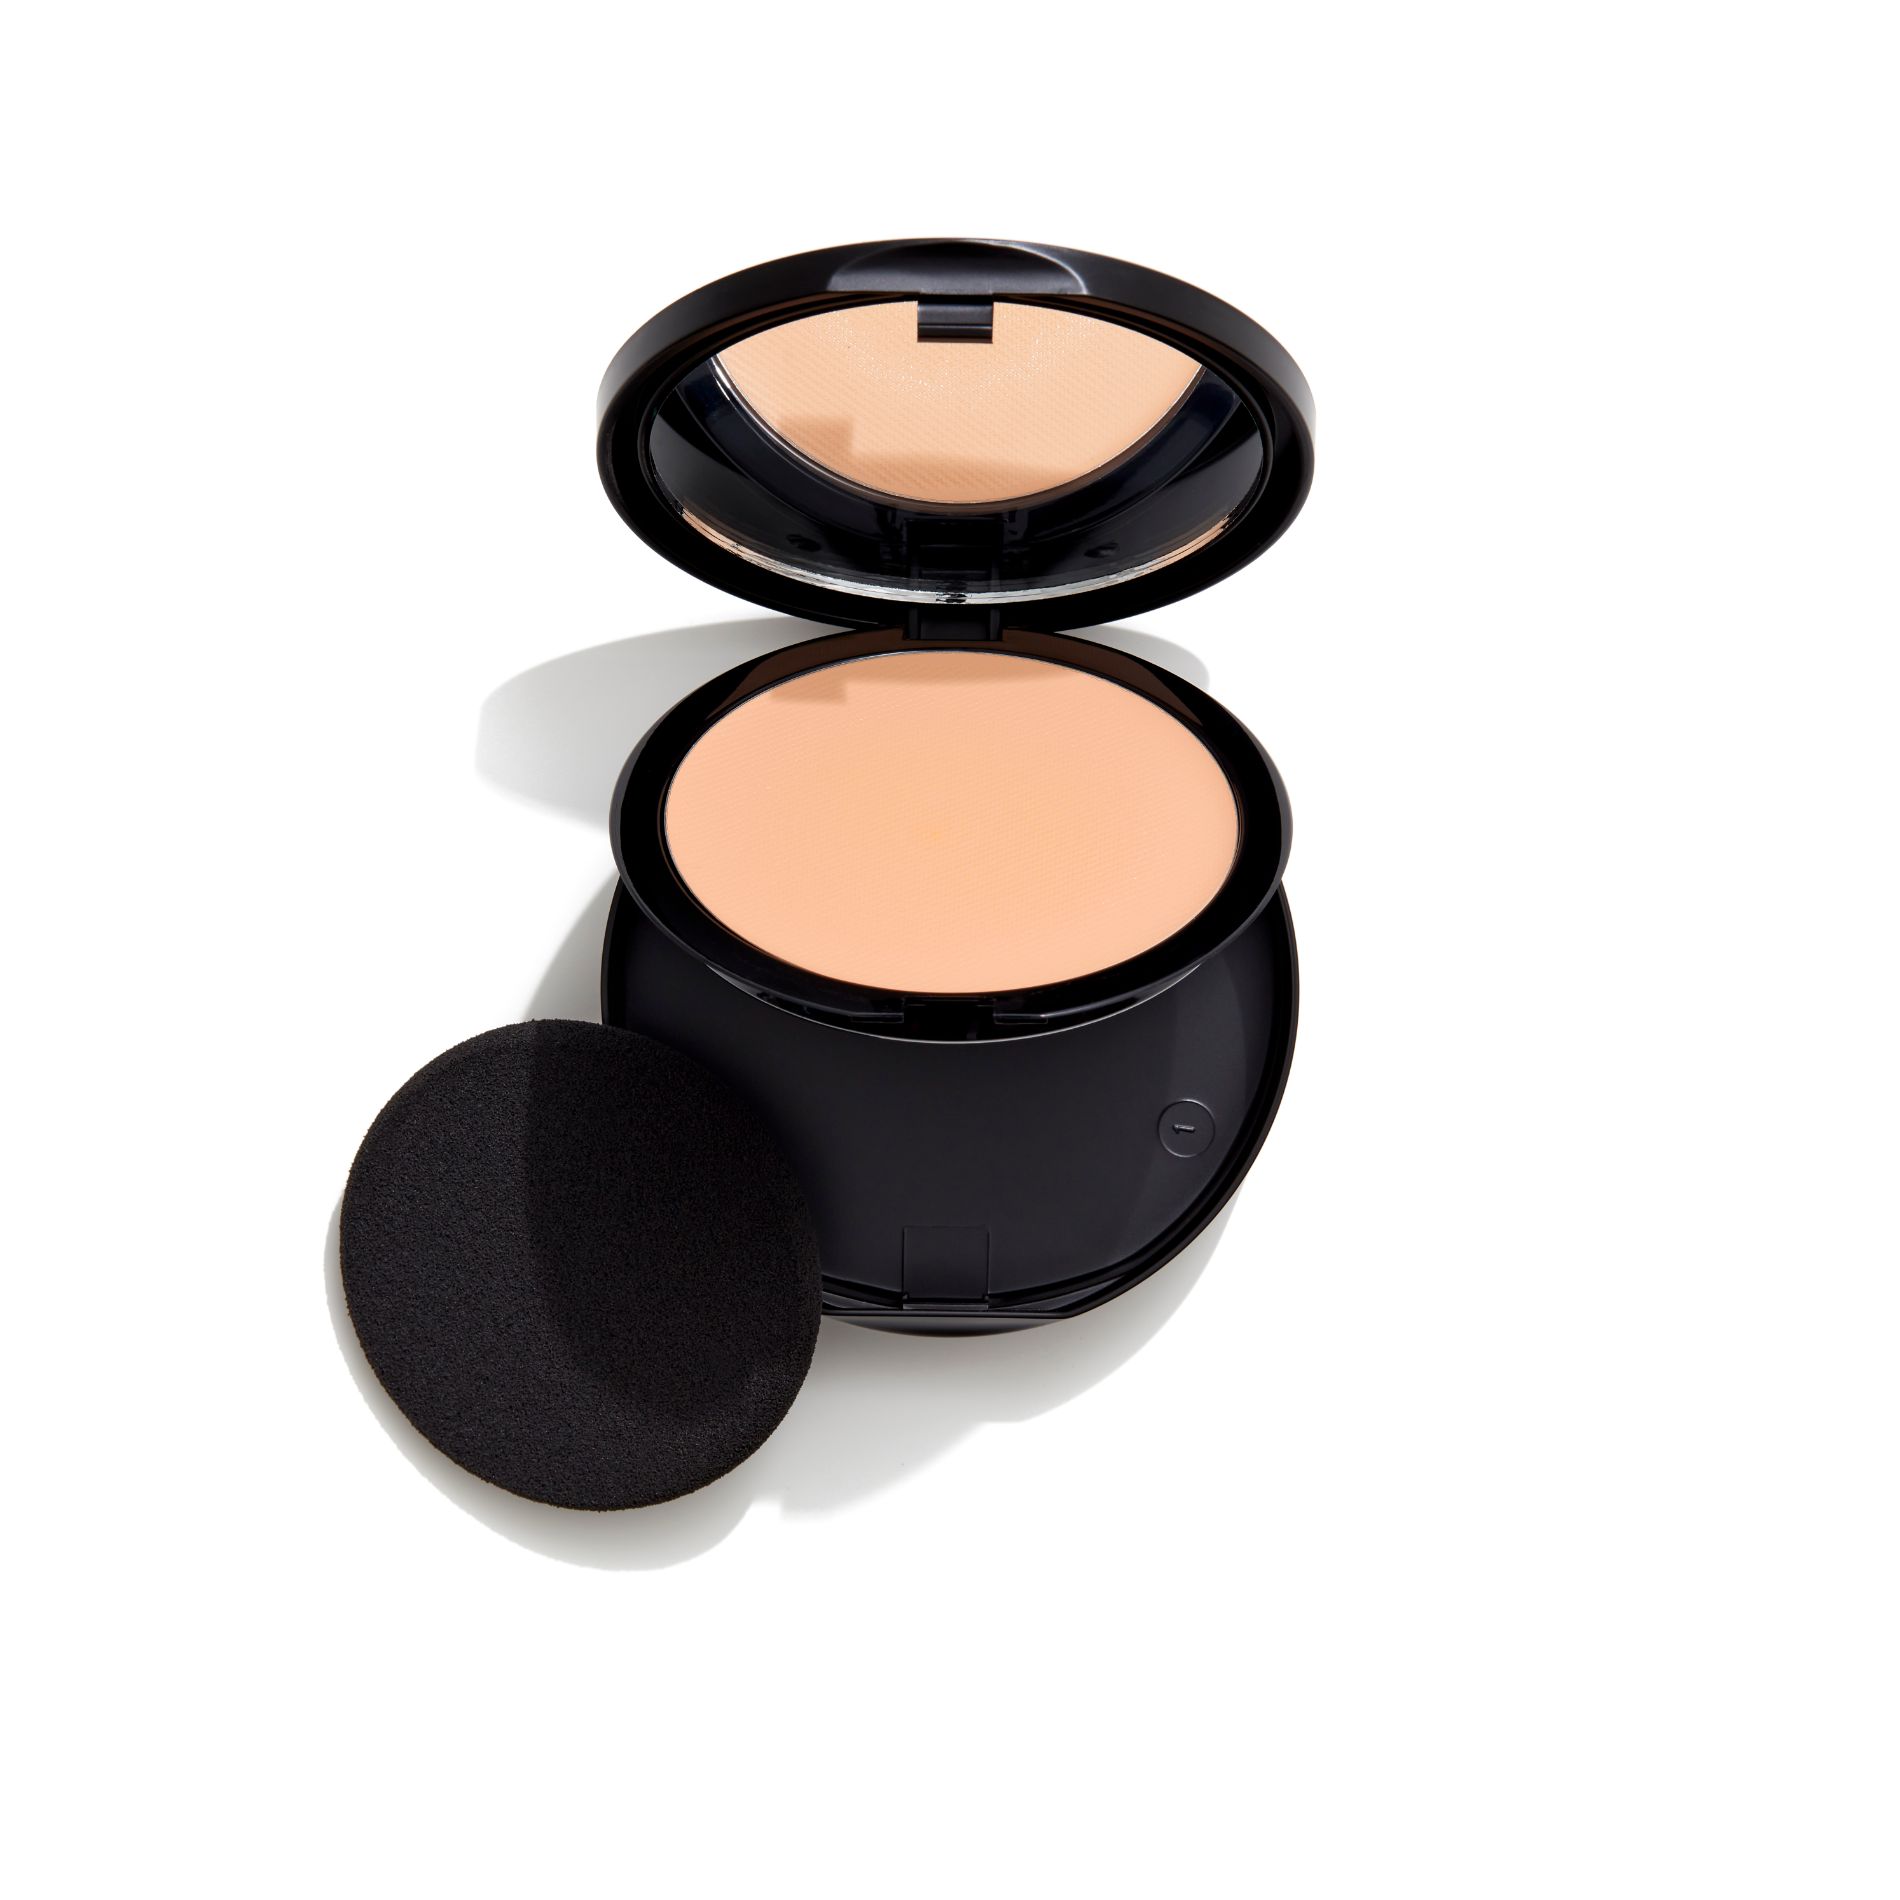 Foundation Plus+ Creamy Compact - 004 Natural